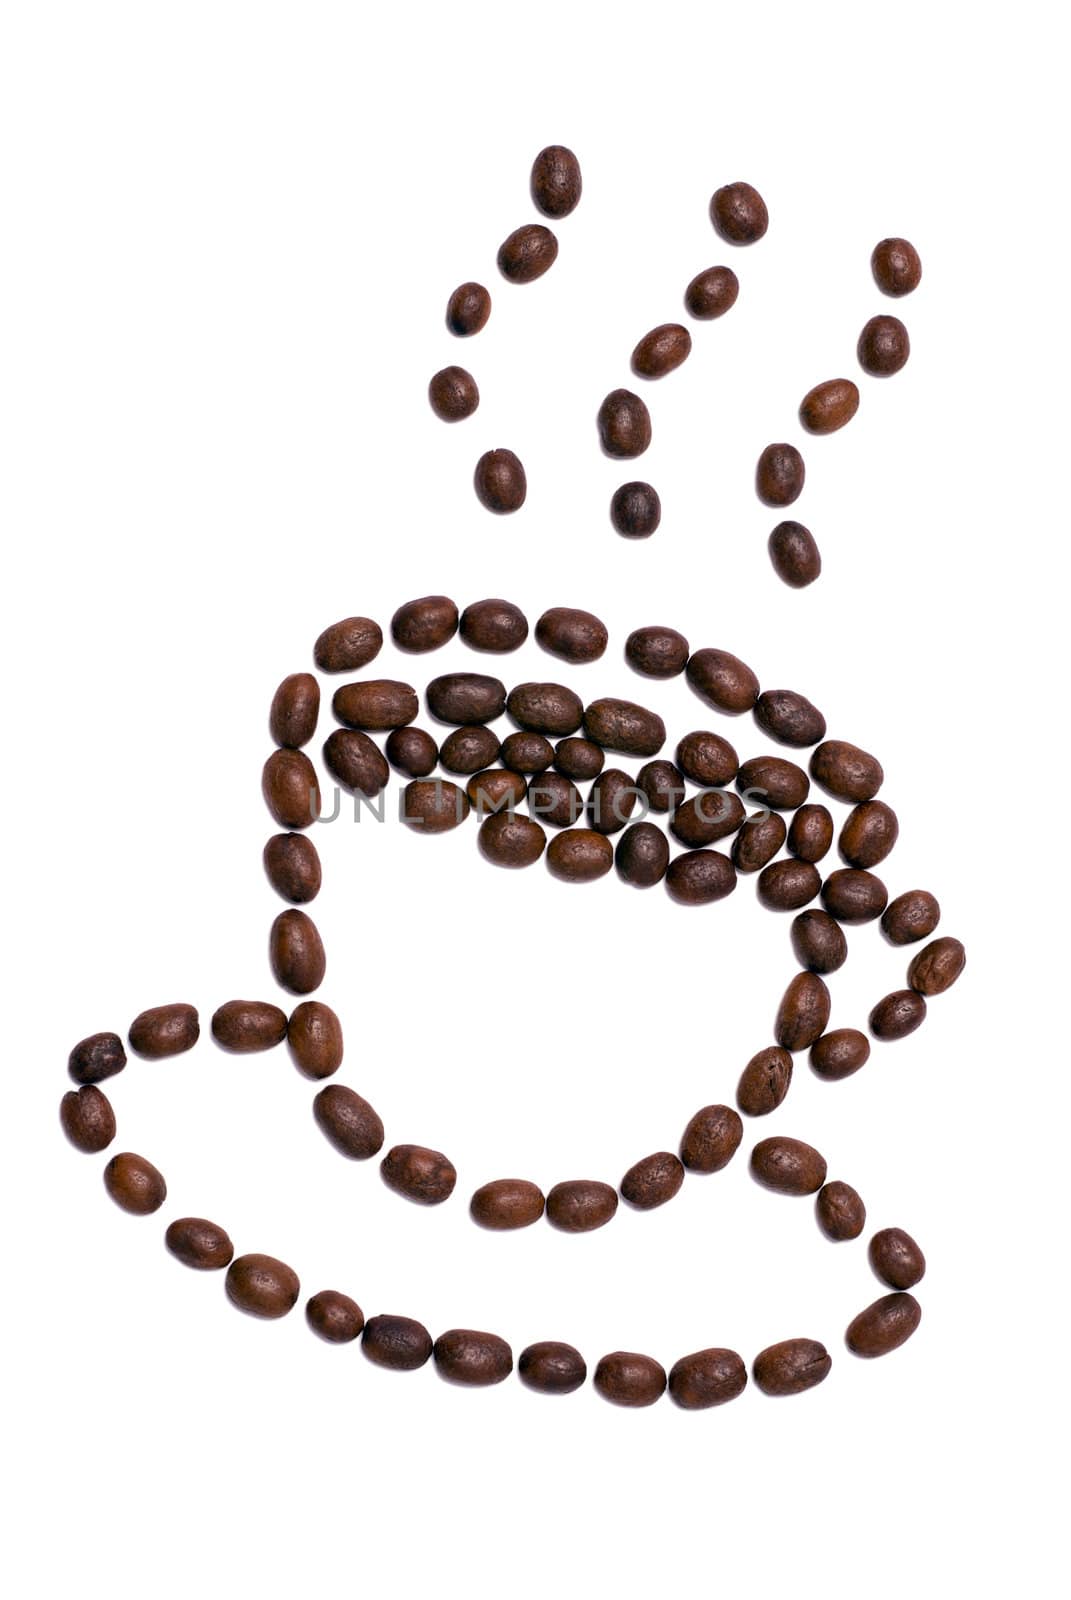 Coffee cup shape made of coffee seeds. Clipping path included.